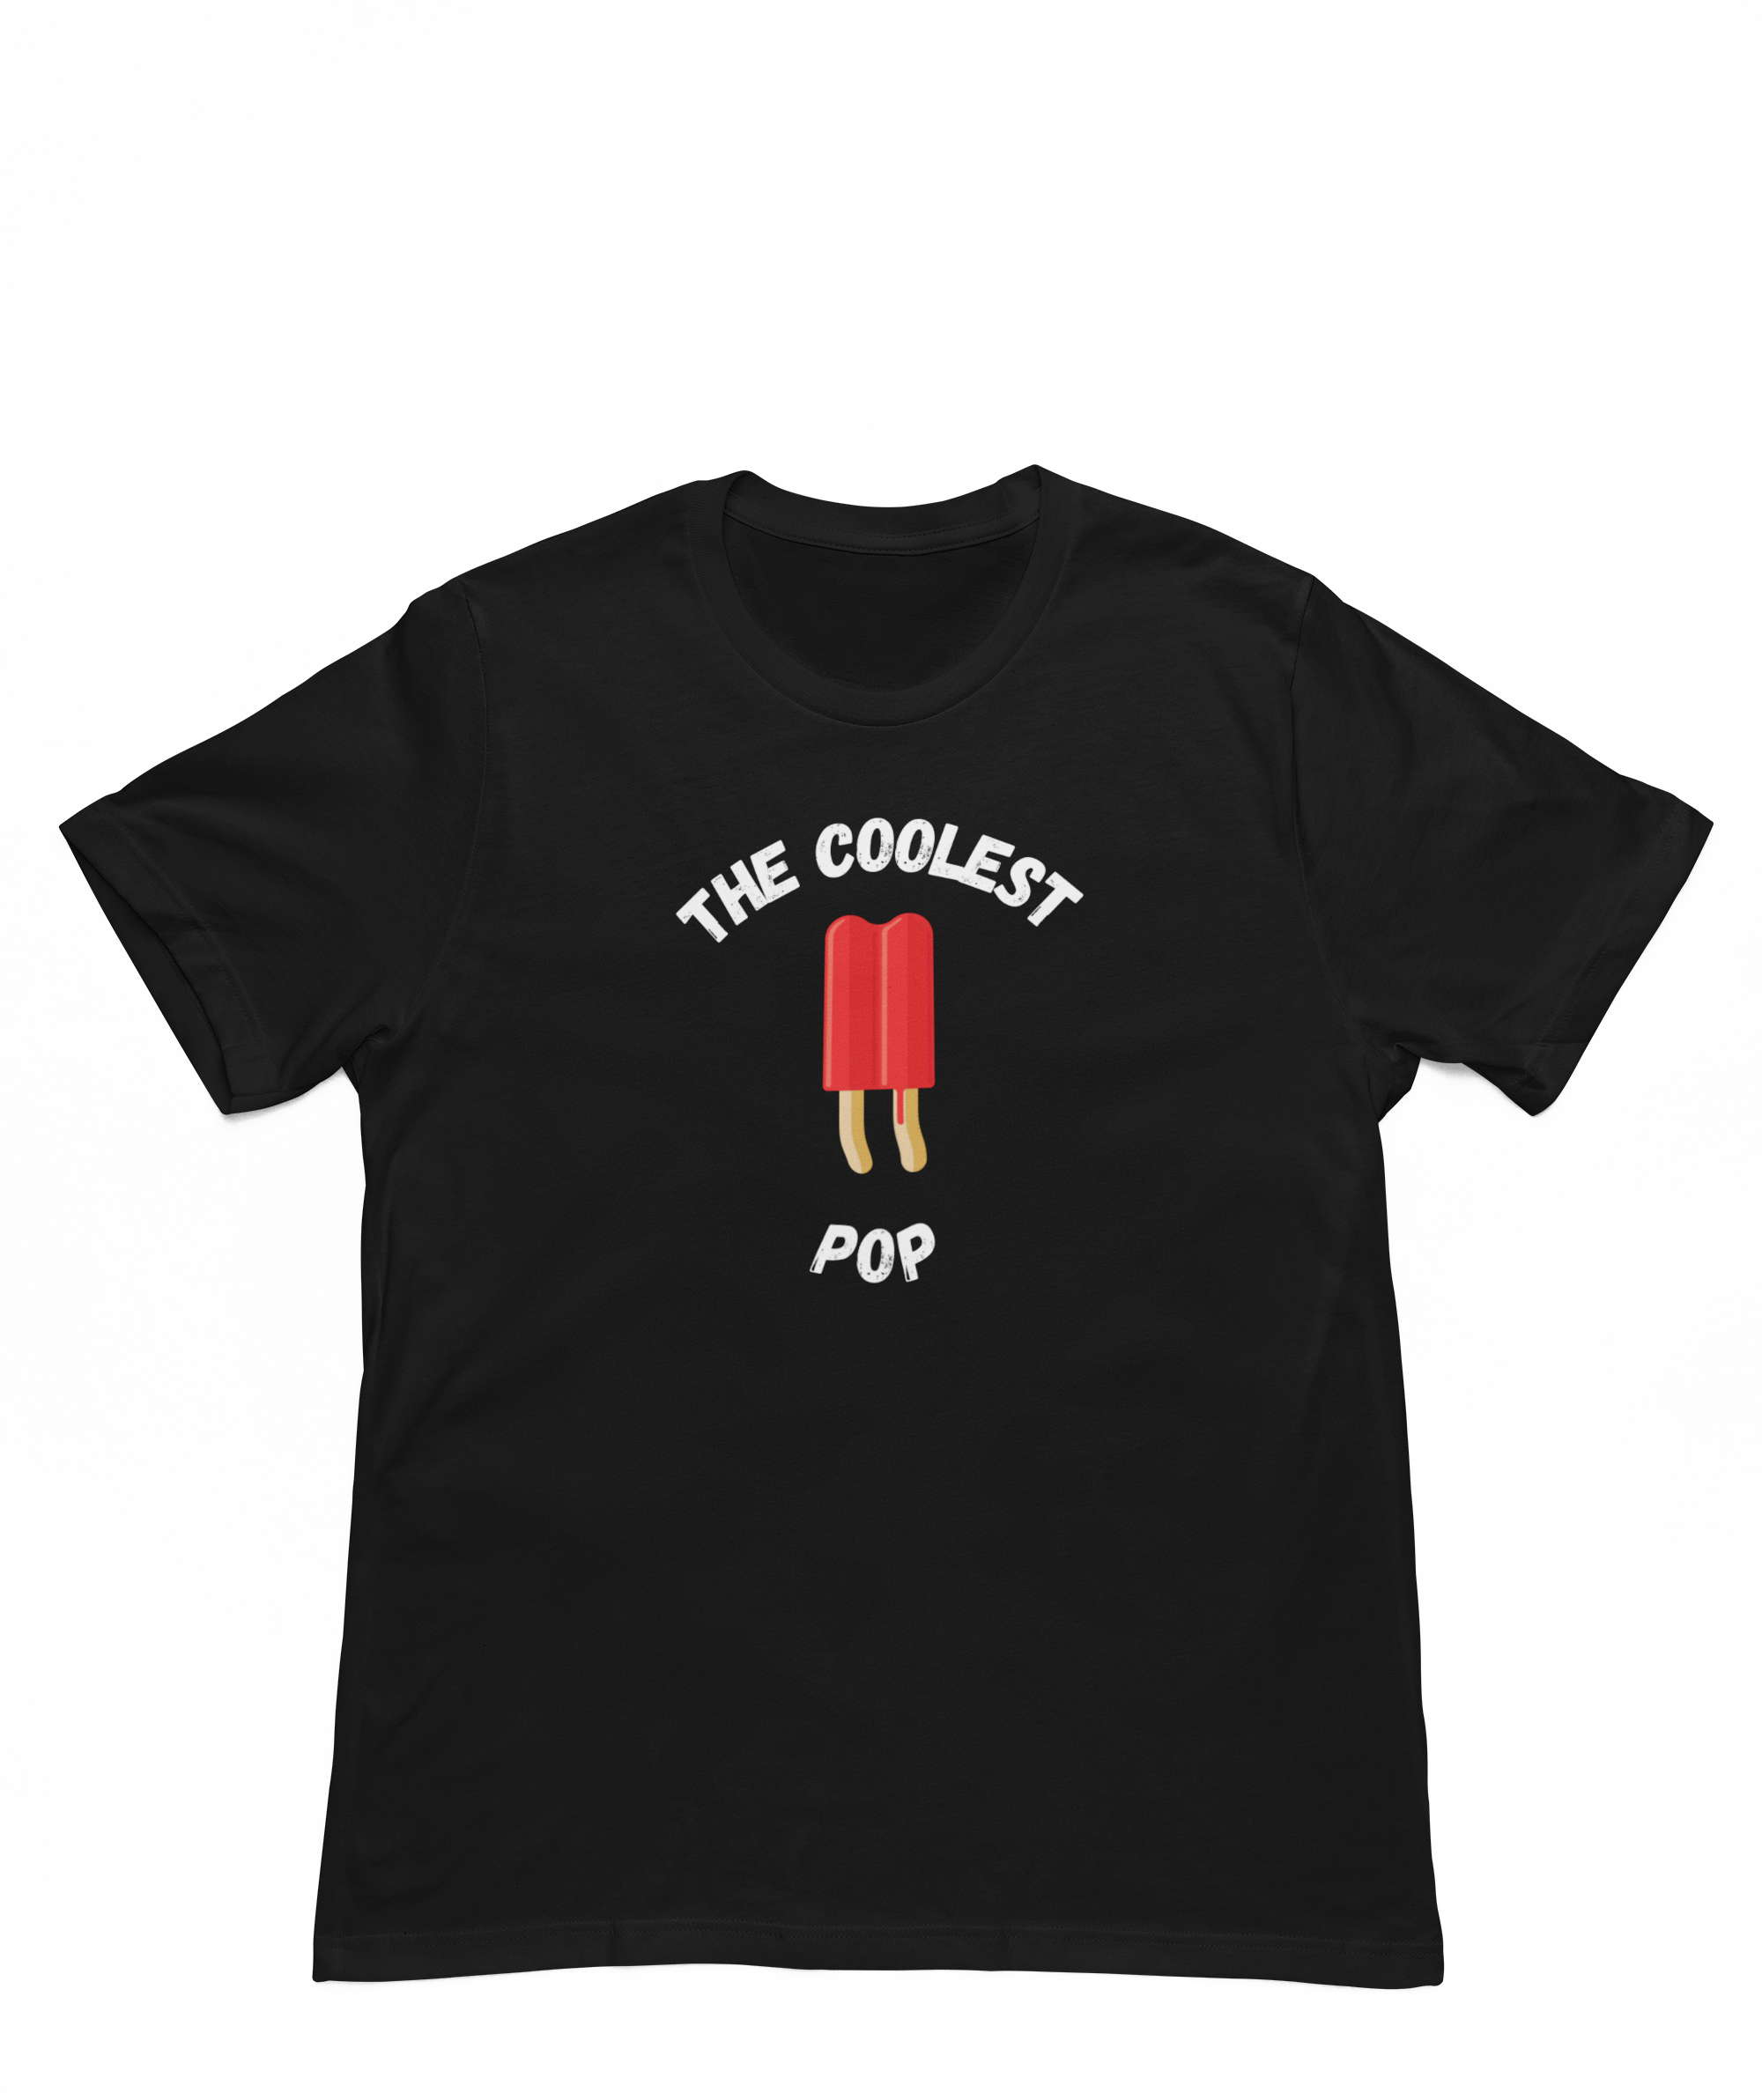 The Coolest pop t-shirt - Father's Day gift